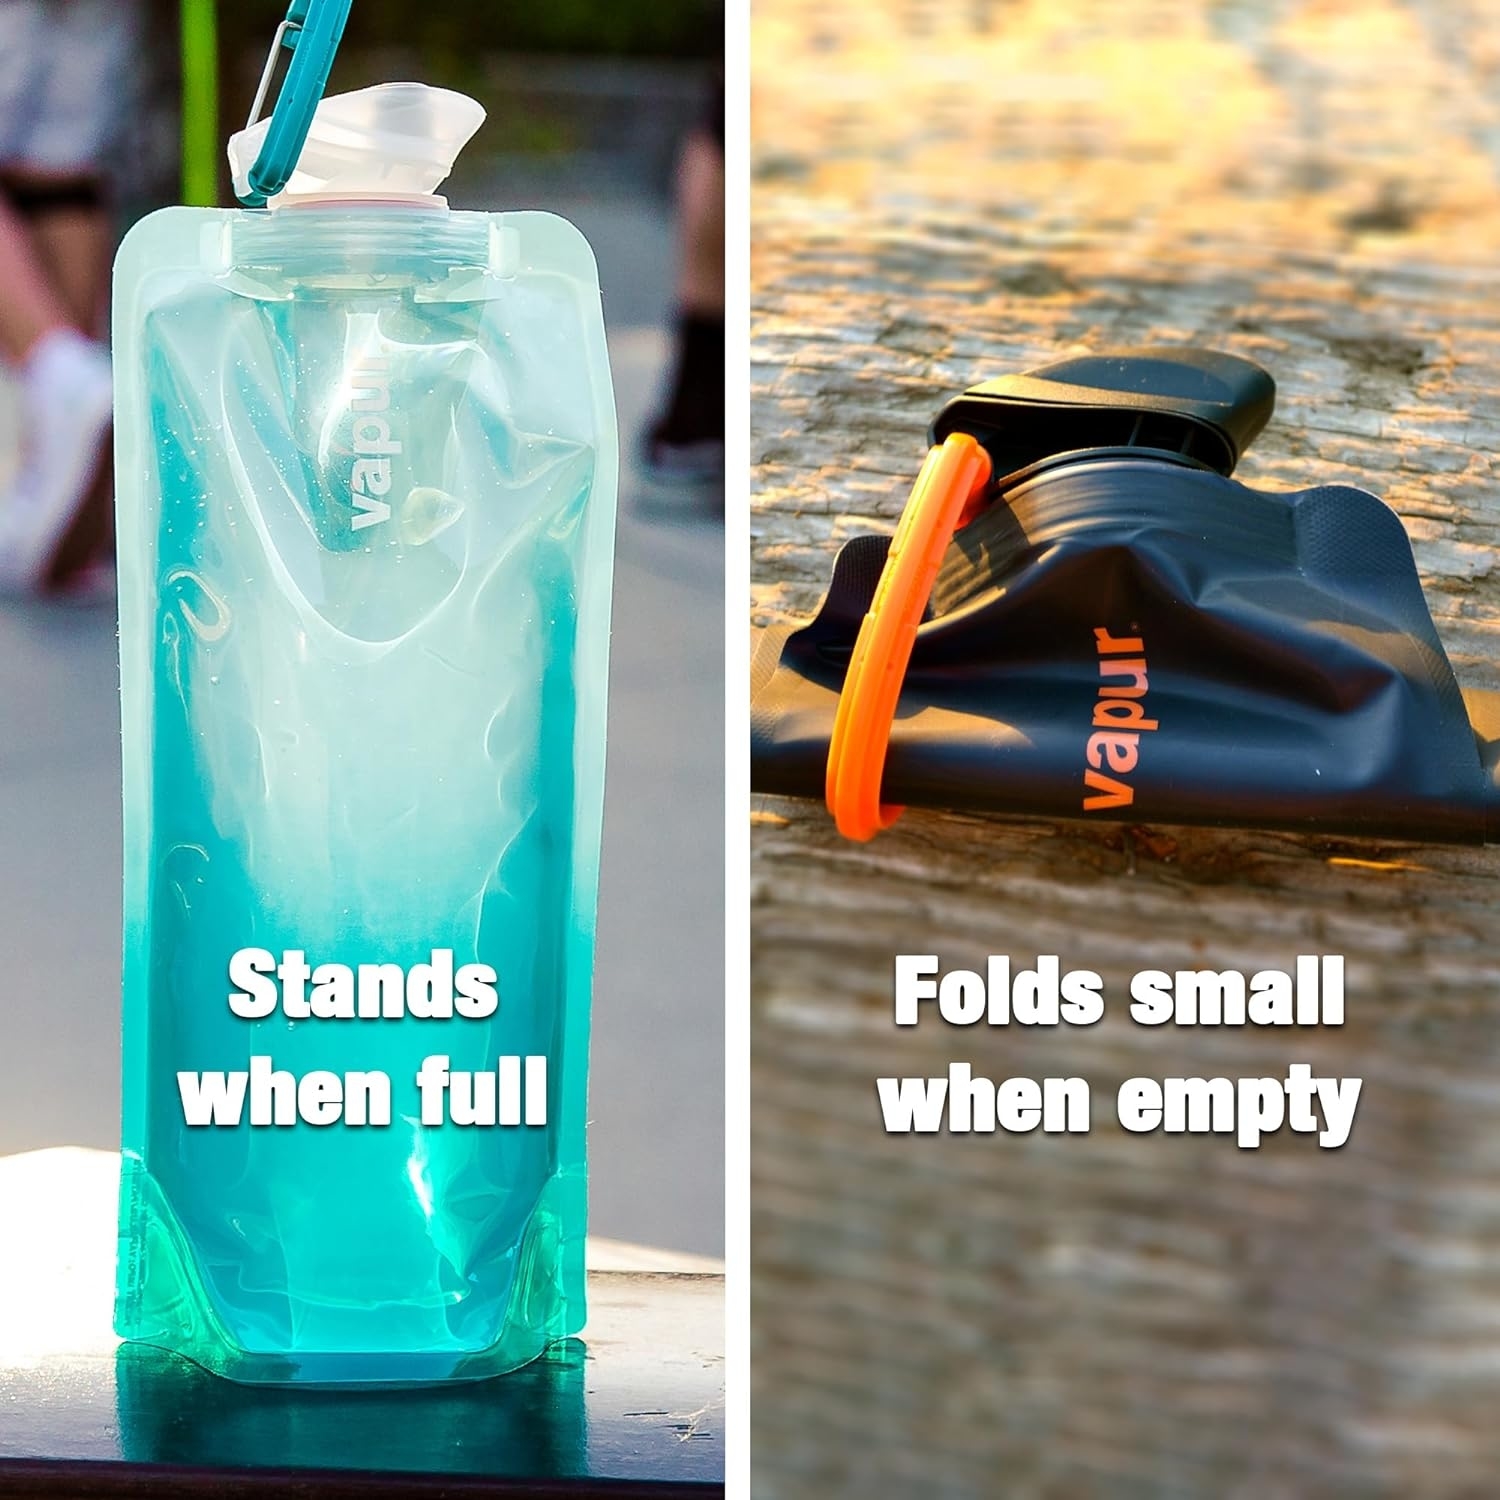 Two portable water bottles, one standing when full, another folded small when empty